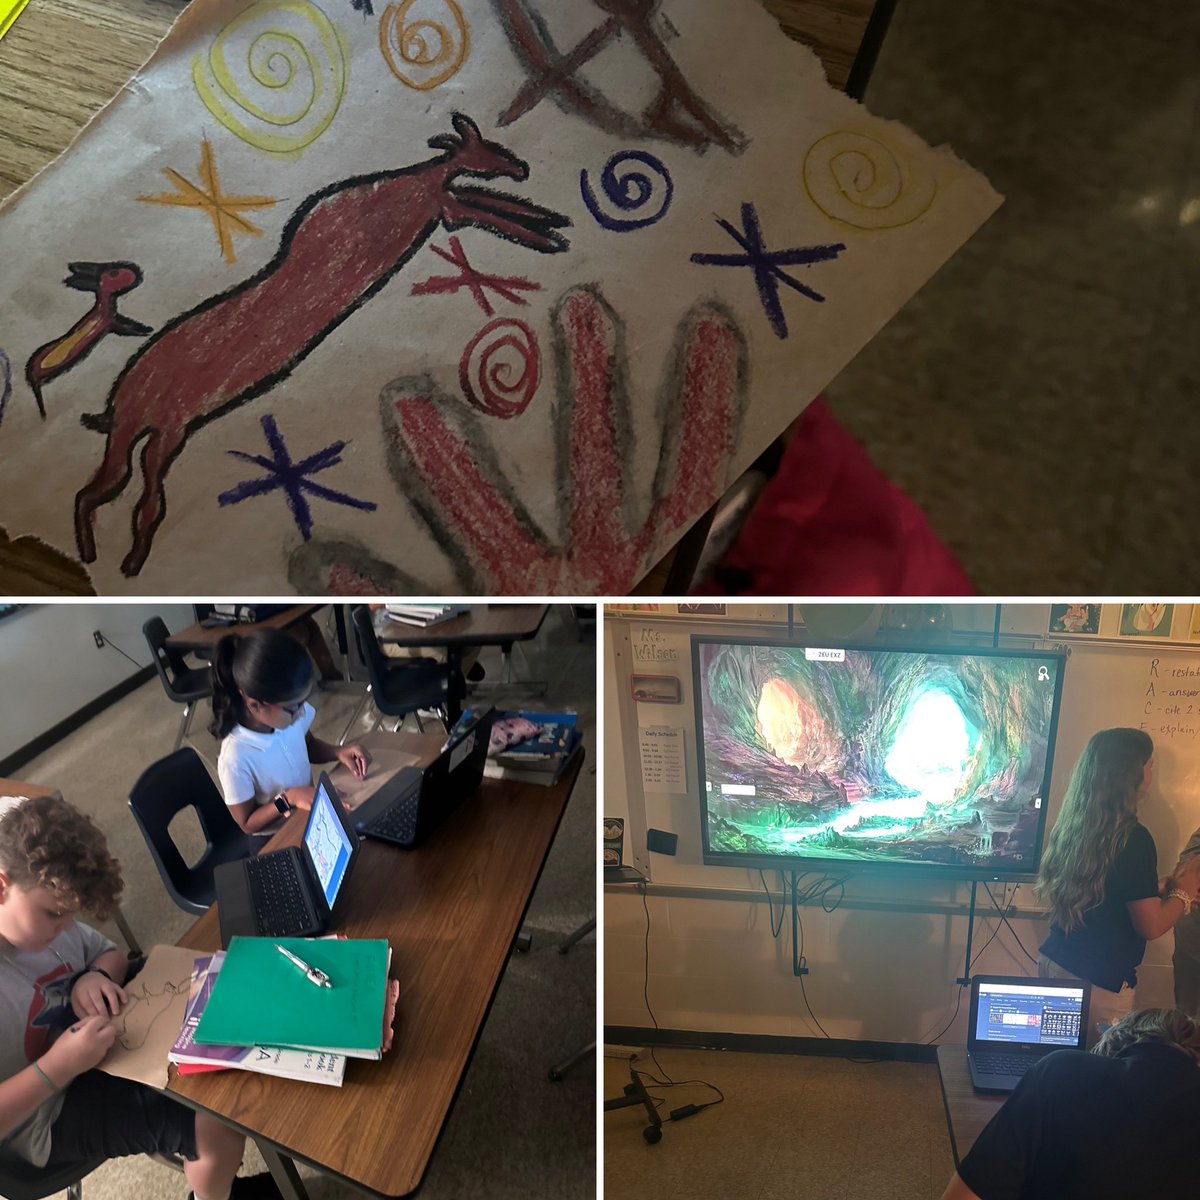 Ms. Wilson’s students created their own cave art in SS class today! She brought in real charcoal & had cave ambiance playing to create an authentic learning experience. 💯 of students were engaged & eager to share about their artwork! @CrosbyMiddle #ThePlaceToBe @clryan25